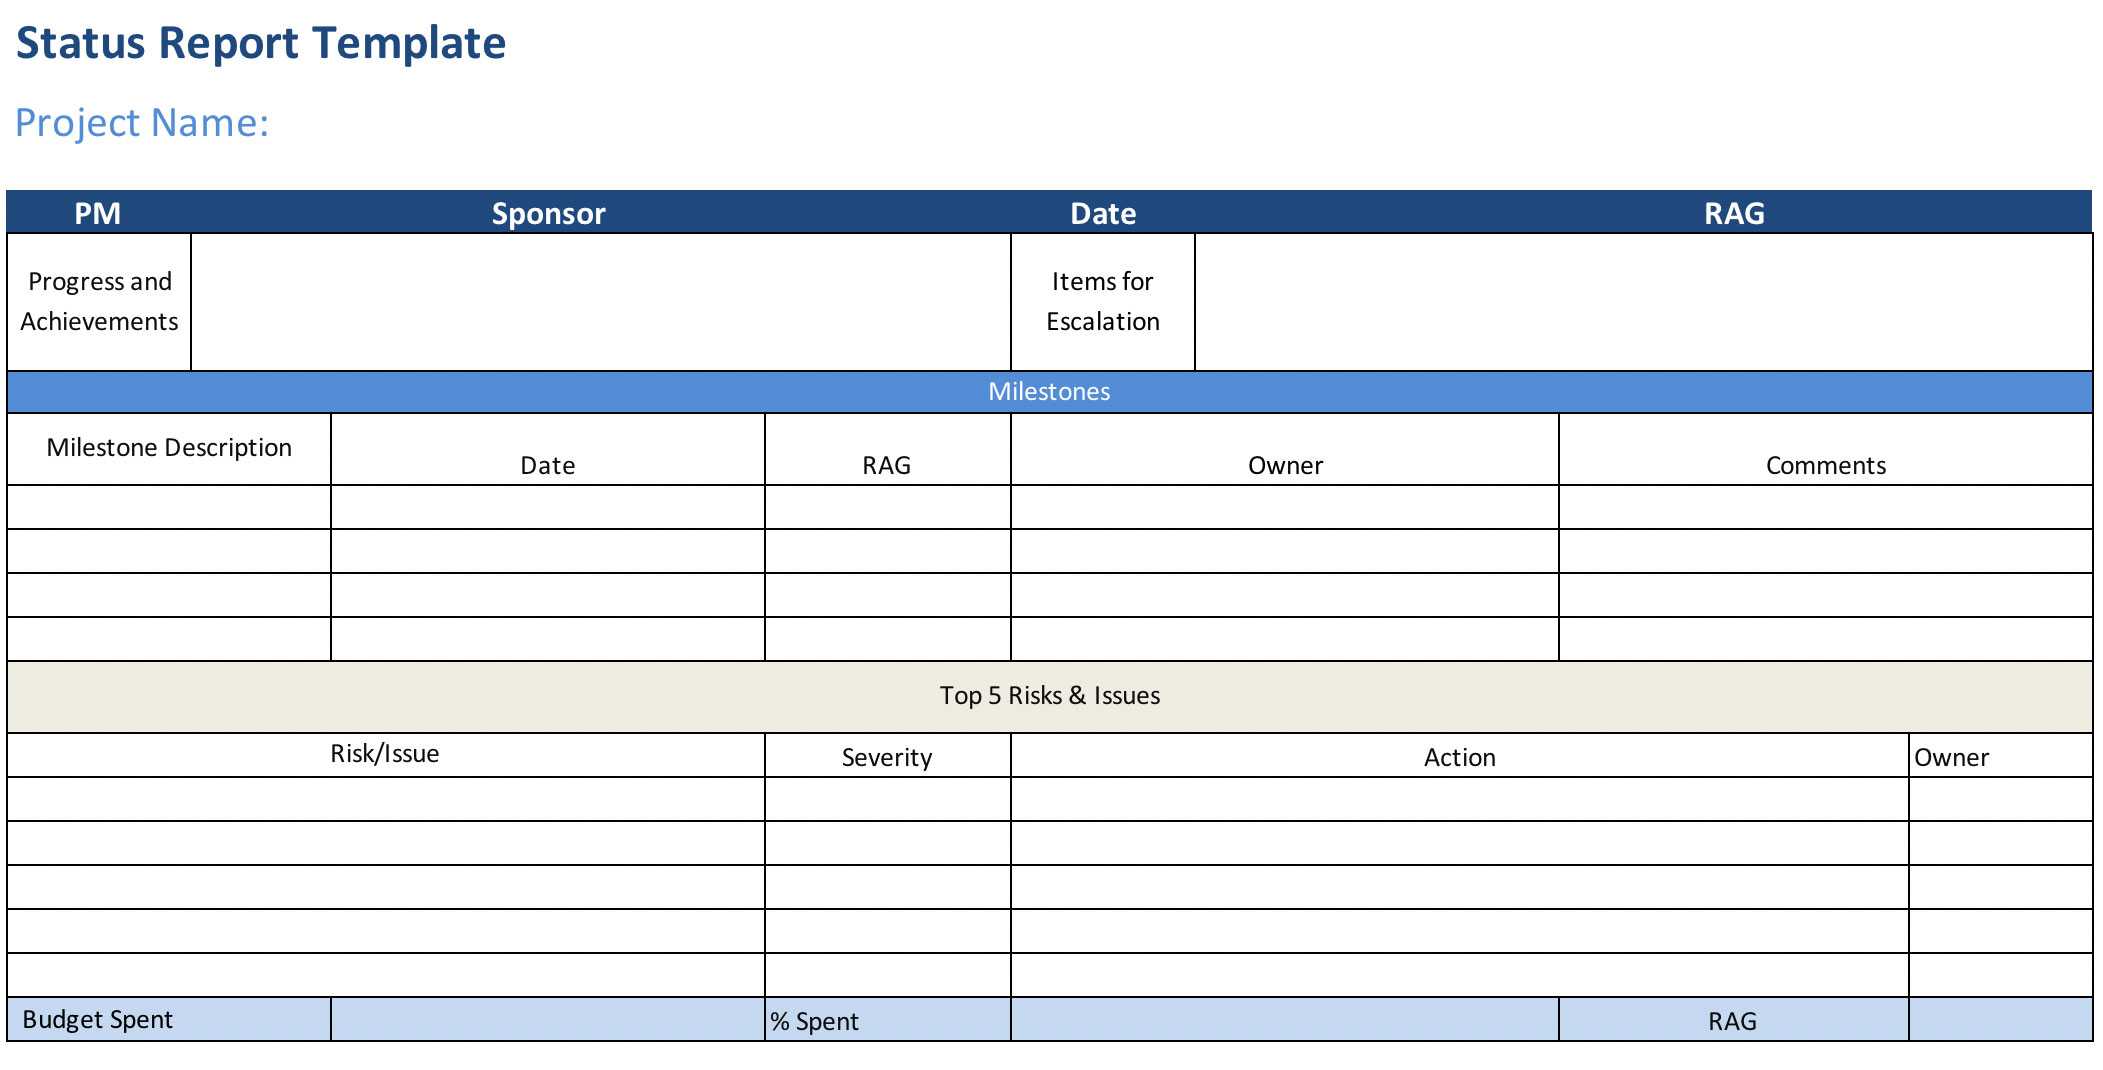 Project Status Report (Free Excel Template) – Projectmanager Throughout Project Status Report Template In Excel